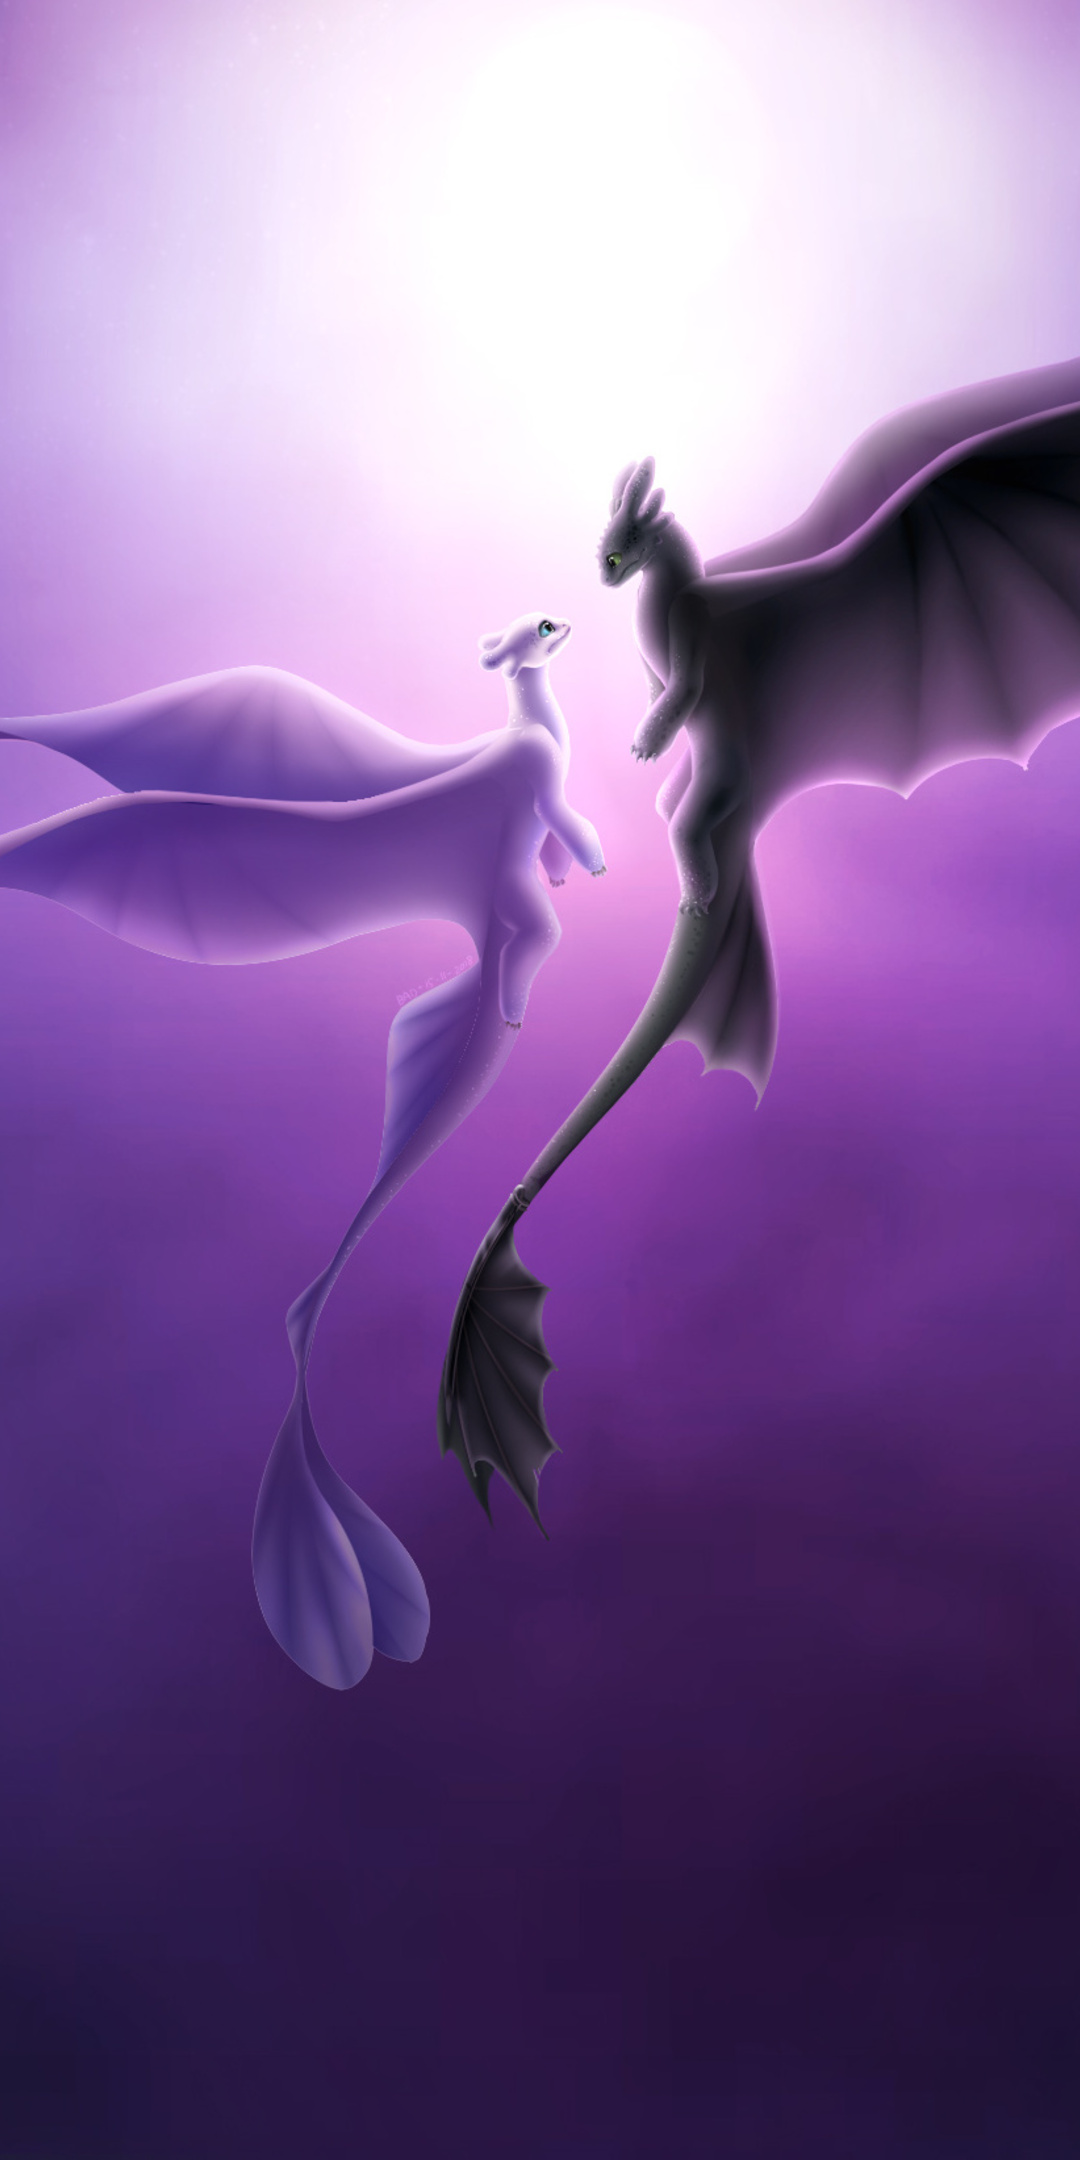 Toothless and Light Fury In Love Wallpaper + Download Wallpapers - SRCWAP